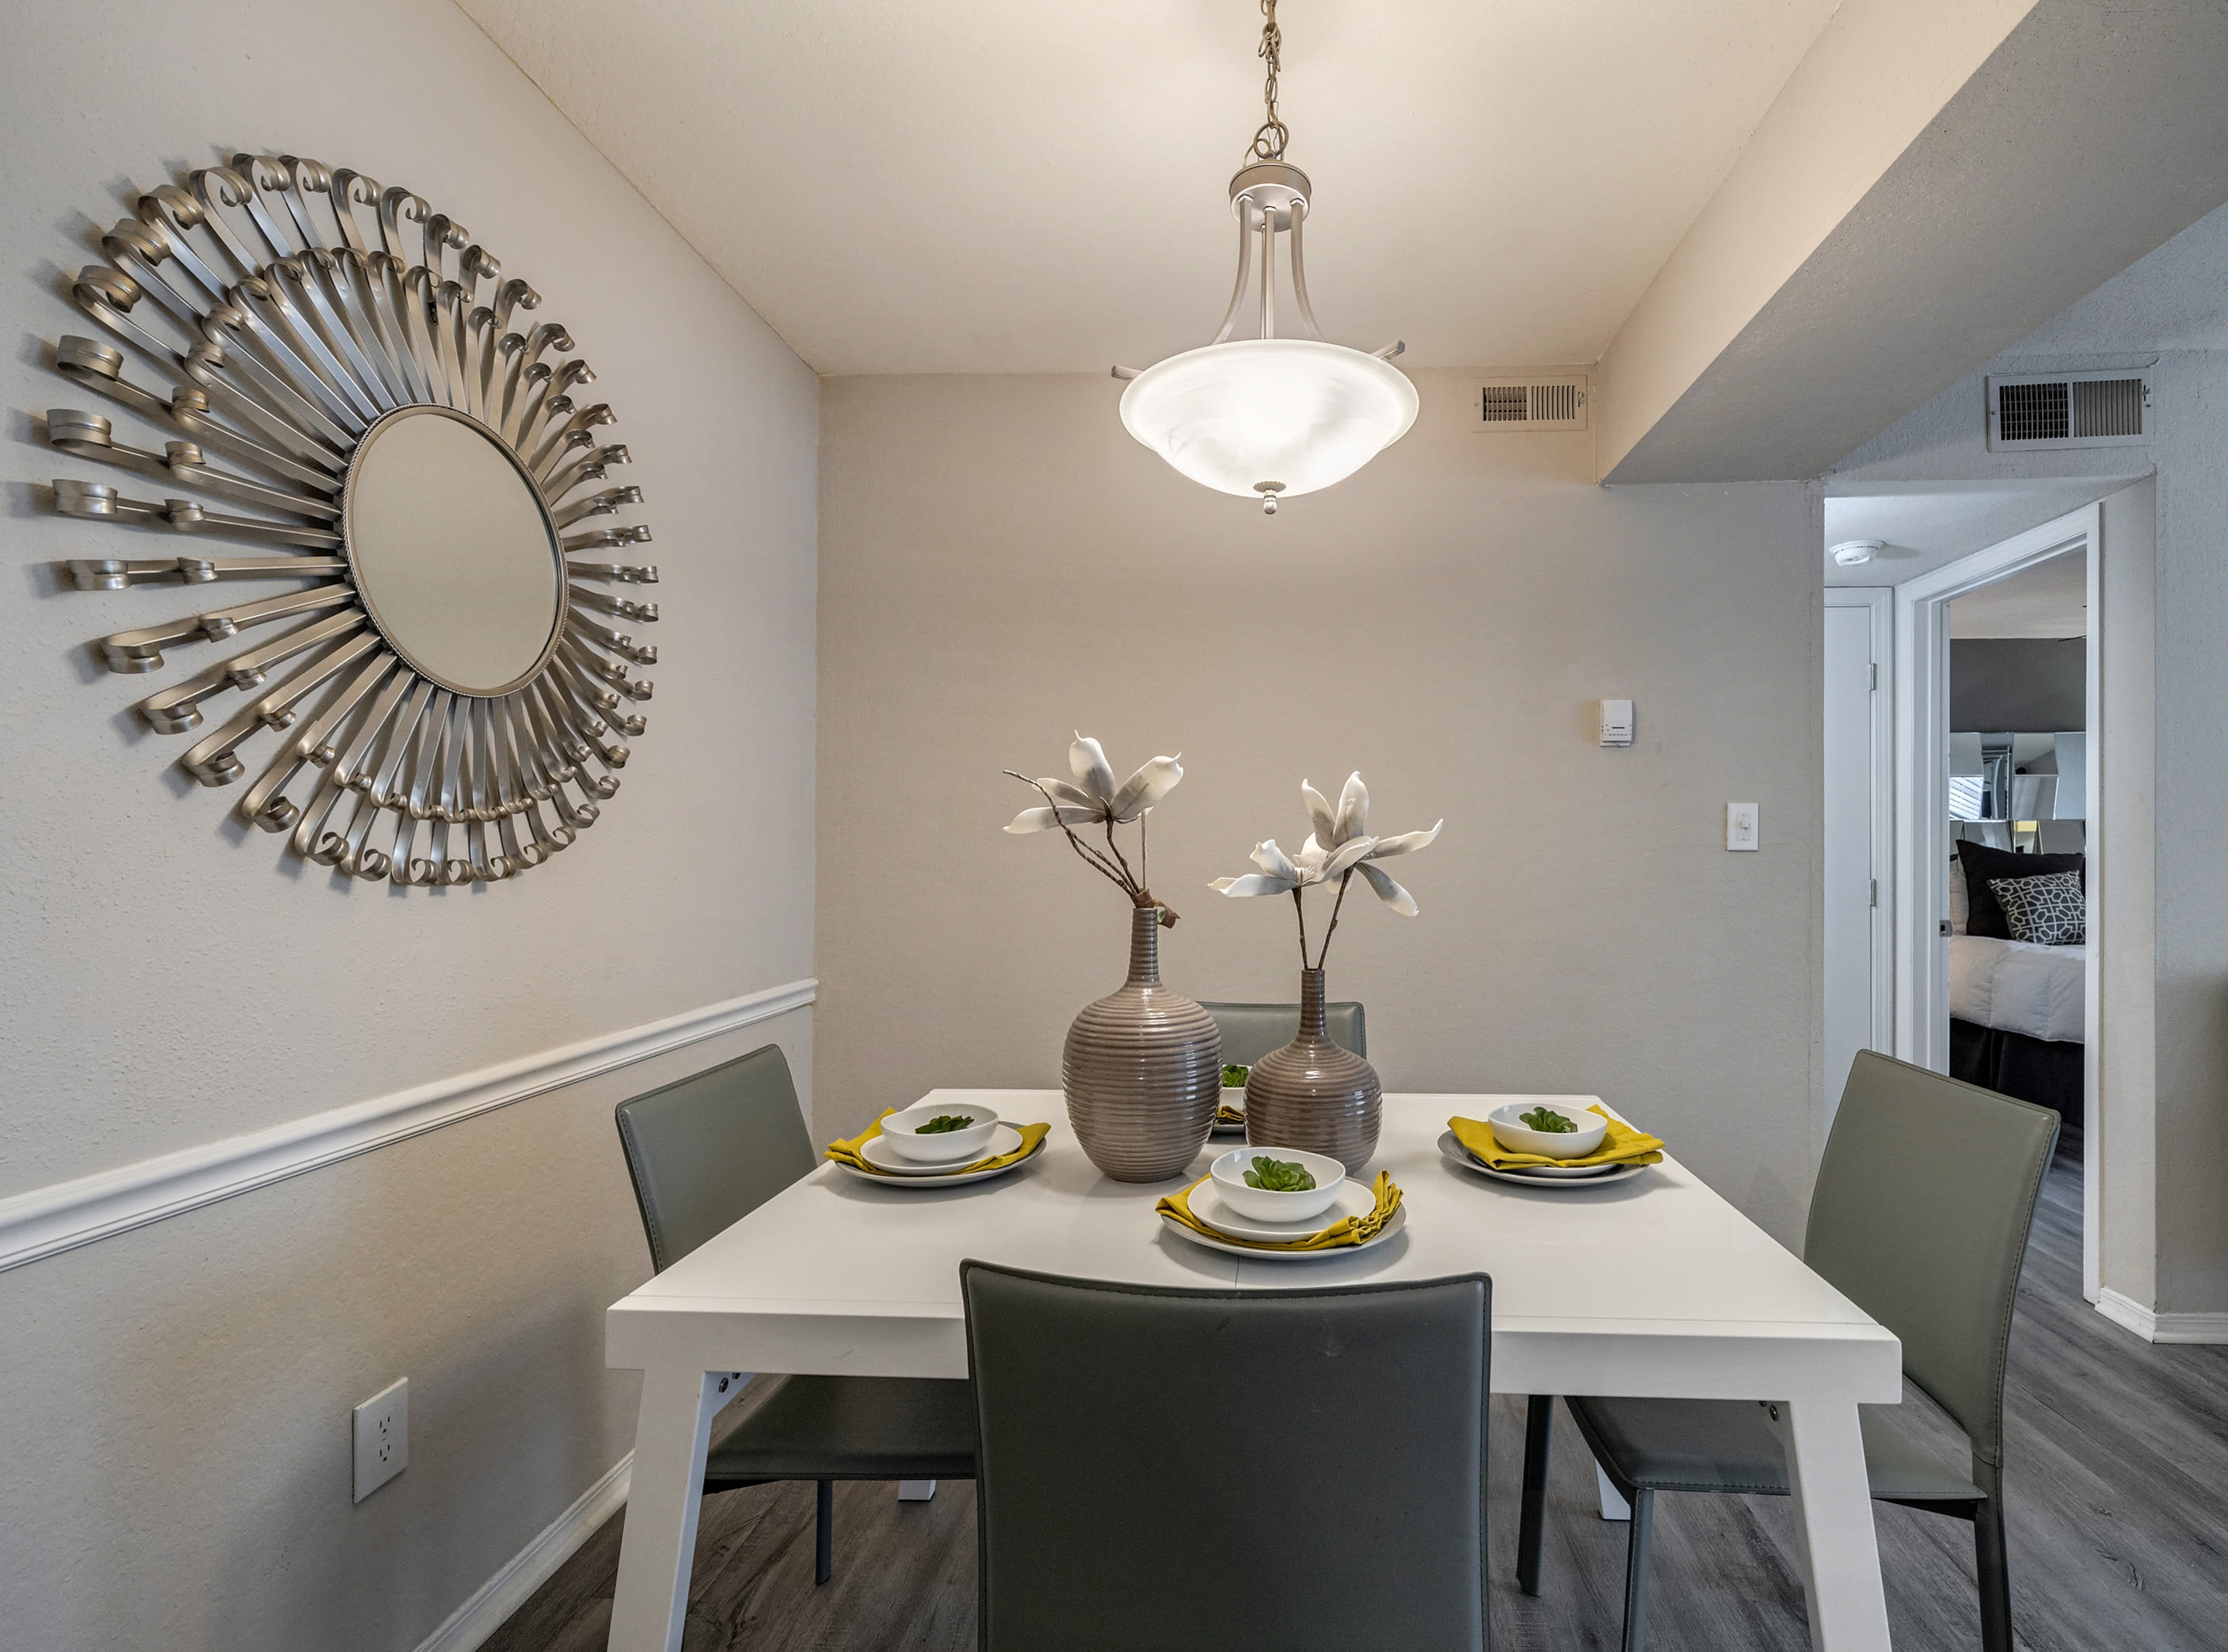 Dining area and kitchen with hardwood-style flooring and a warm yellow accent wall in a model home at Castlegate Collier Hills in Atlanta, Georgia